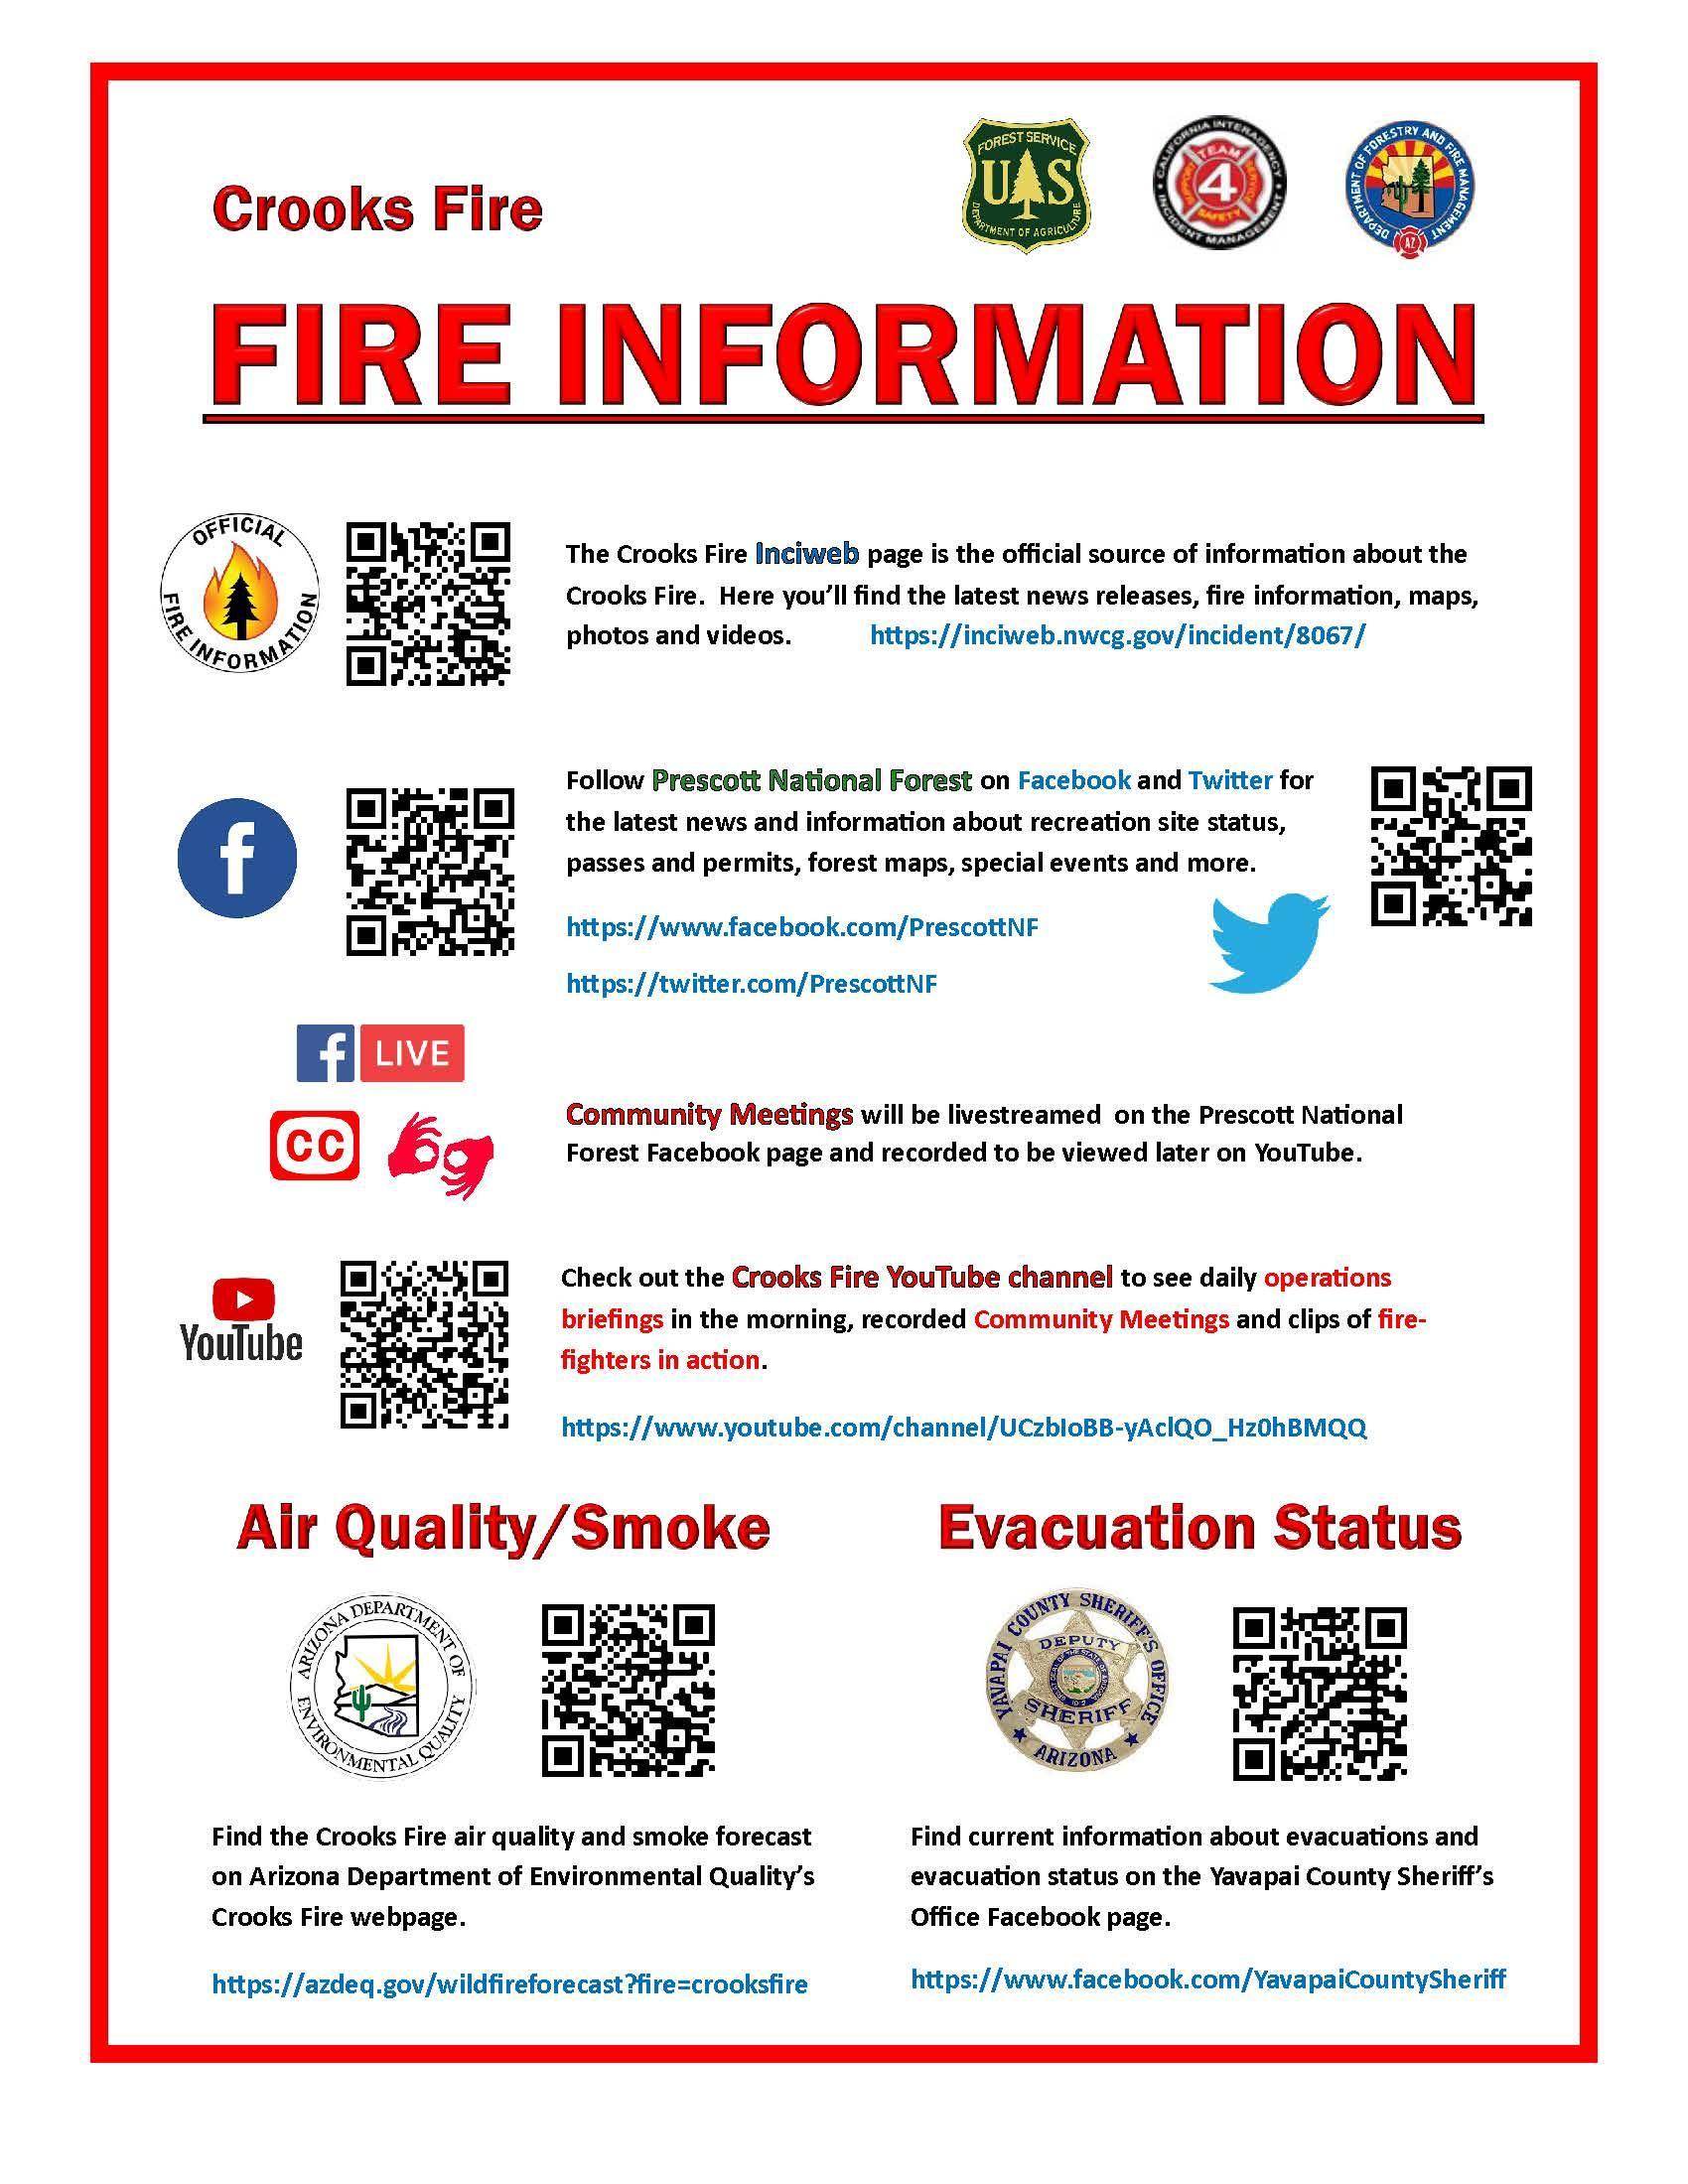 QR codes to connect to various information sources about the fire